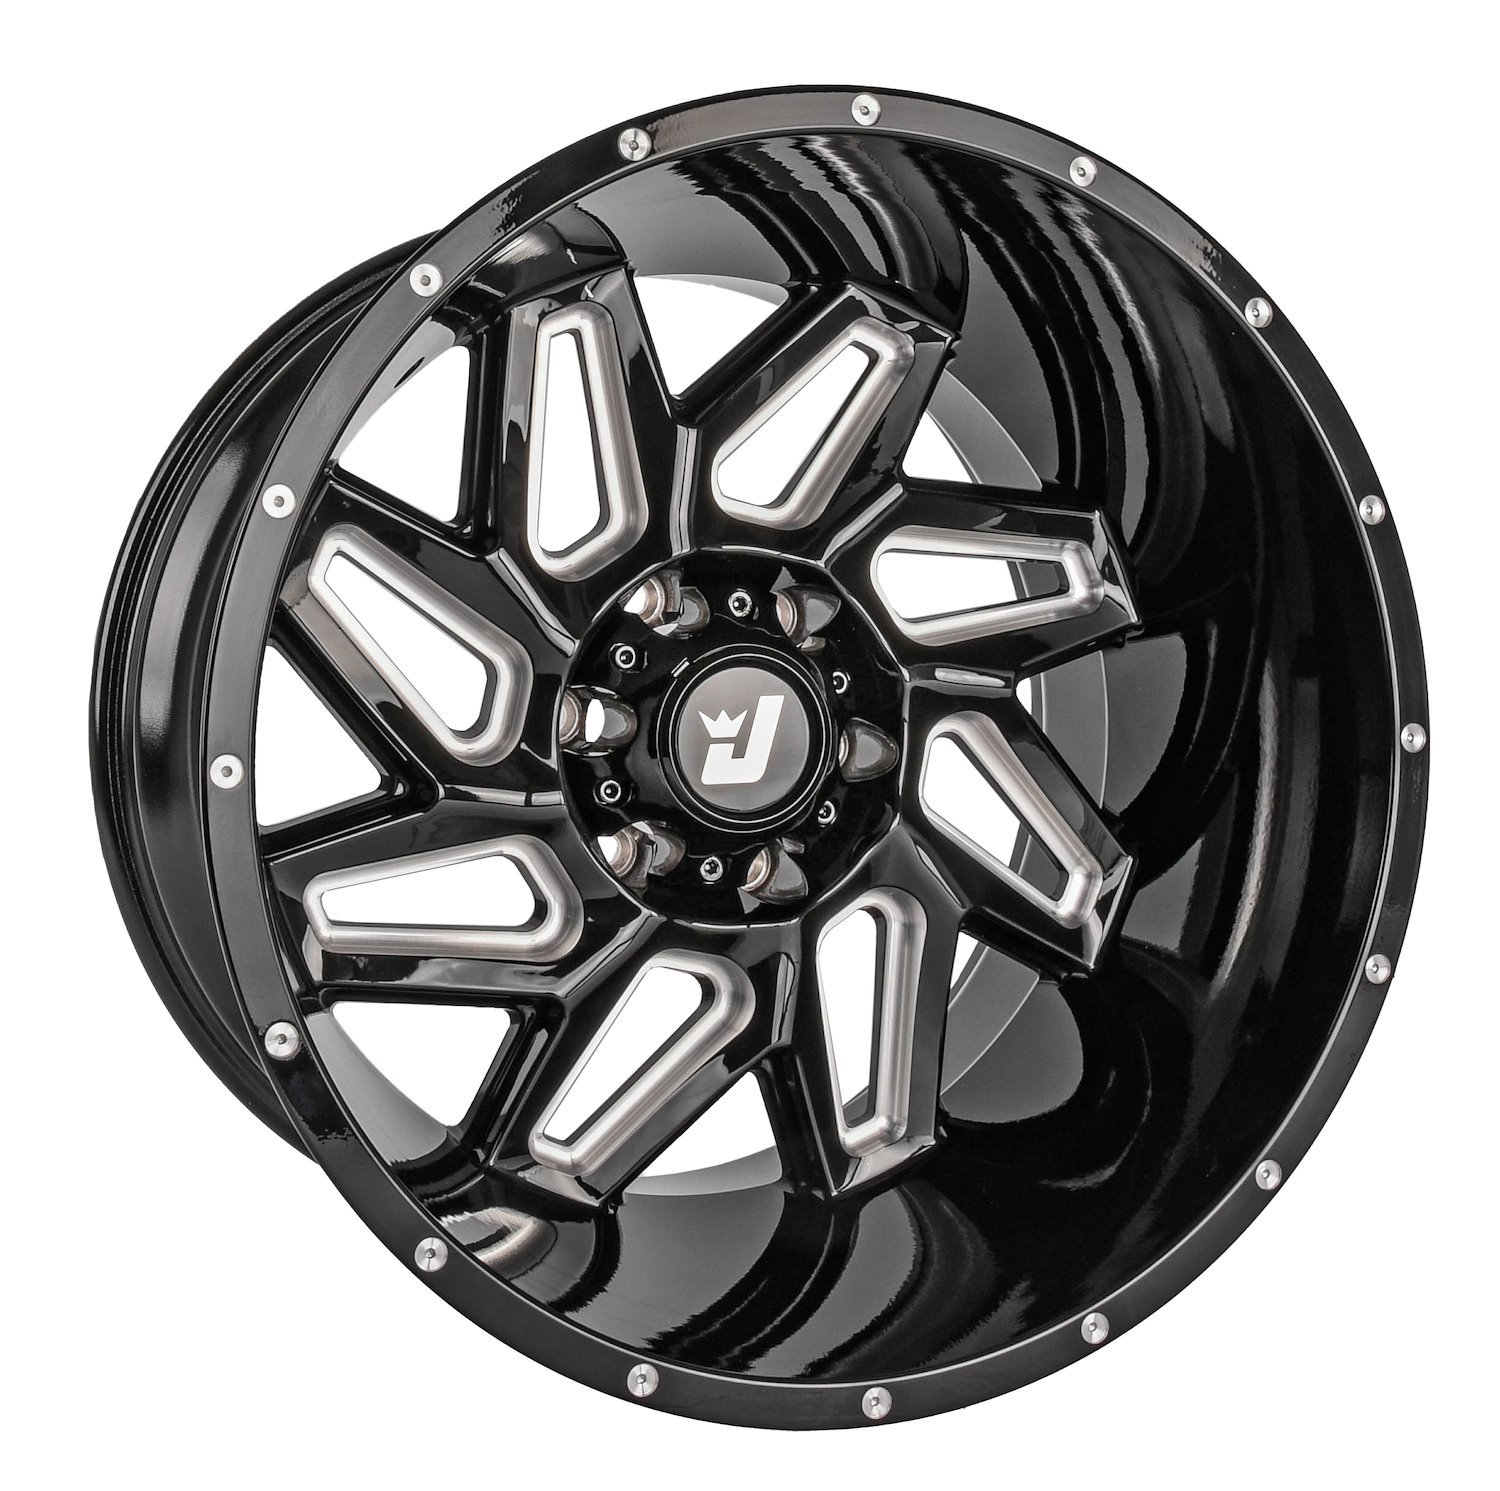 Catalyst Wheel [Size: 20" x 12"] Gloss Black with Milled Spokes